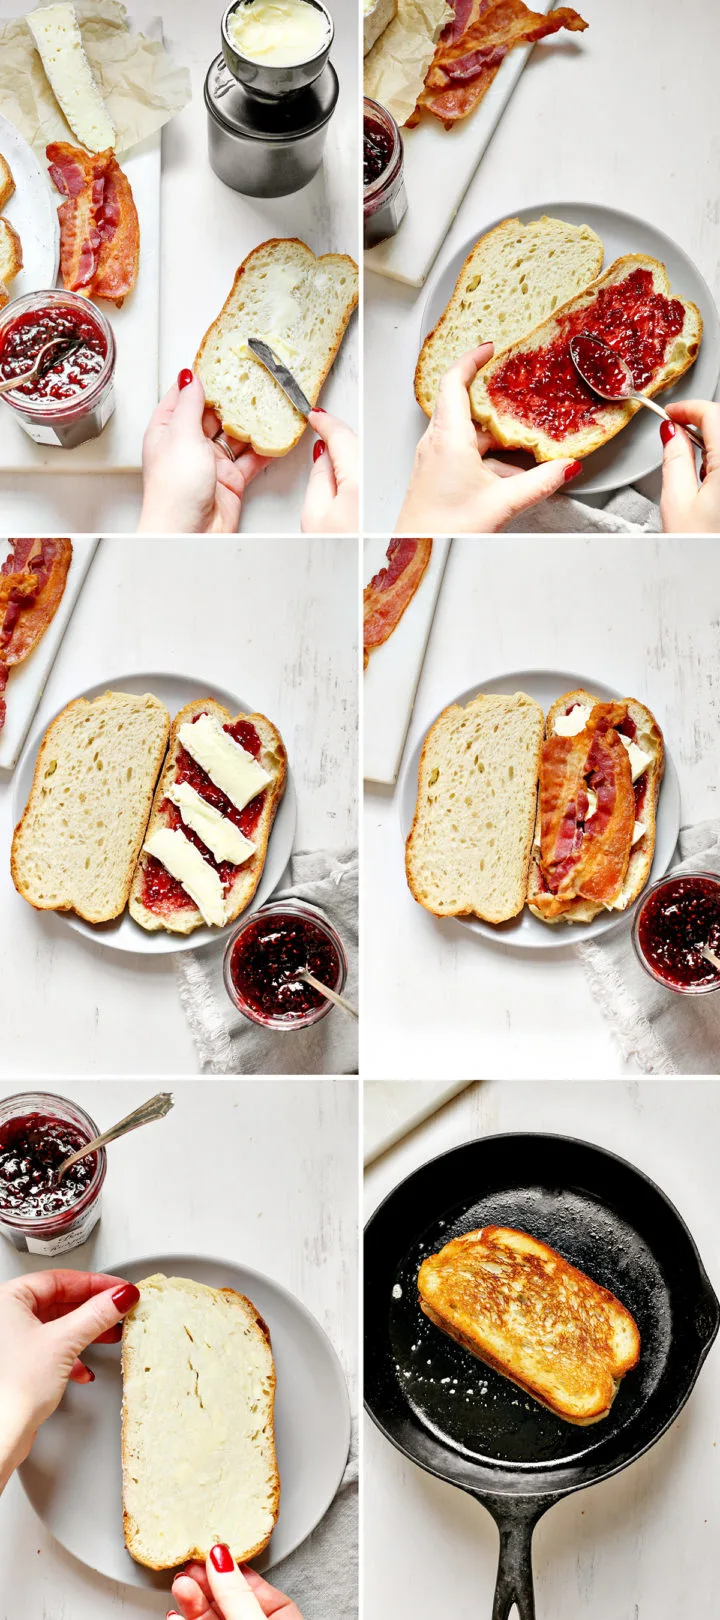 step by step photos showing how to make this brie grilled cheese recipe